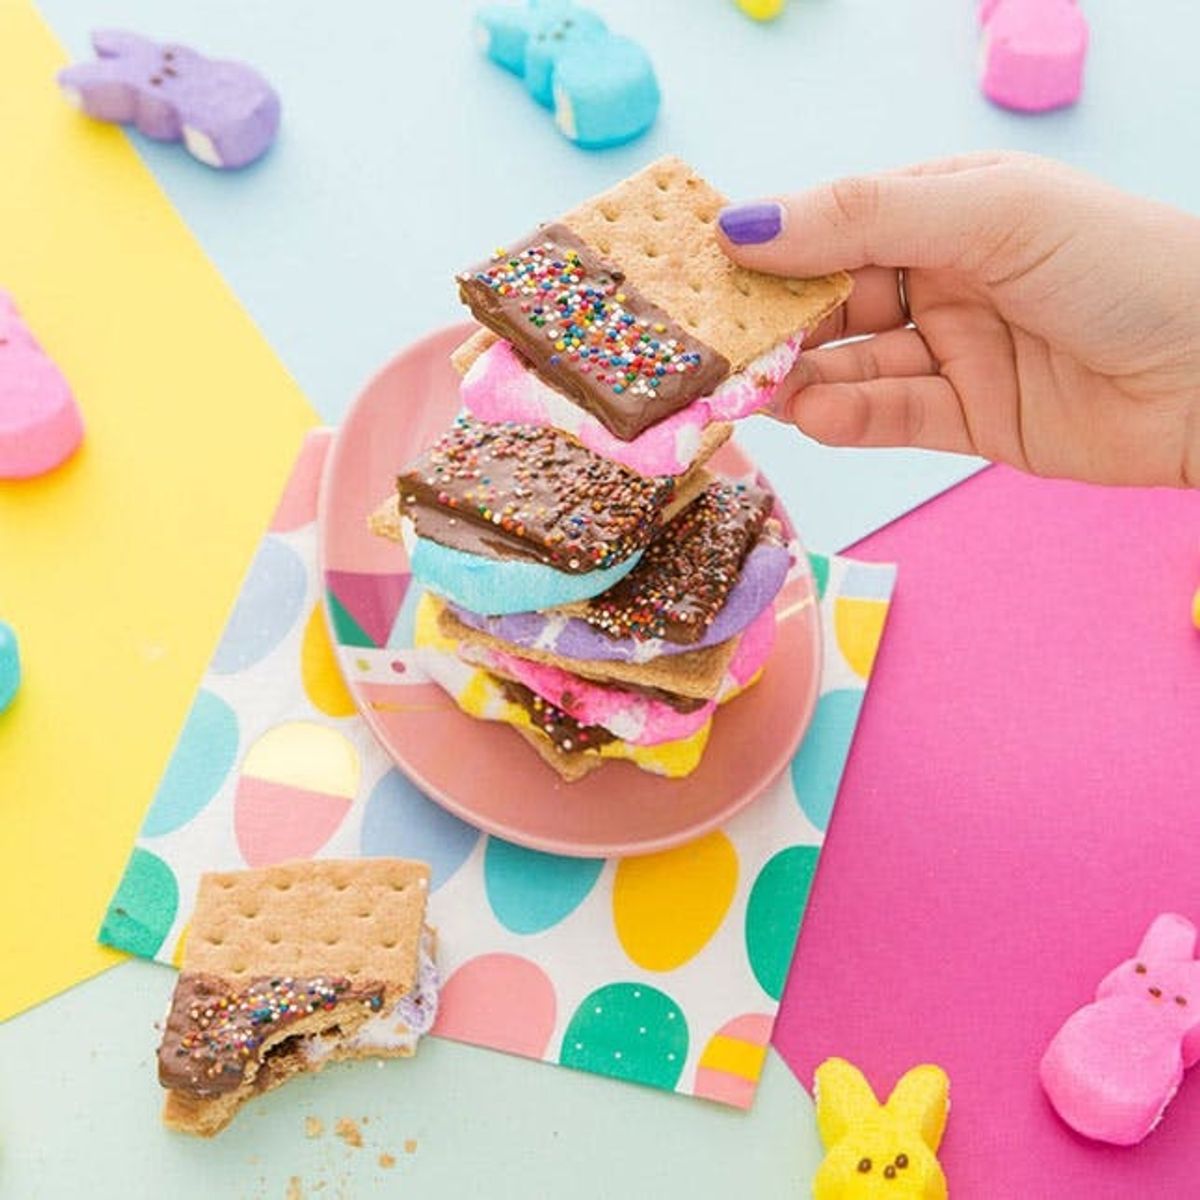 12 Easter Desserts the Bunny Himself Would Adore